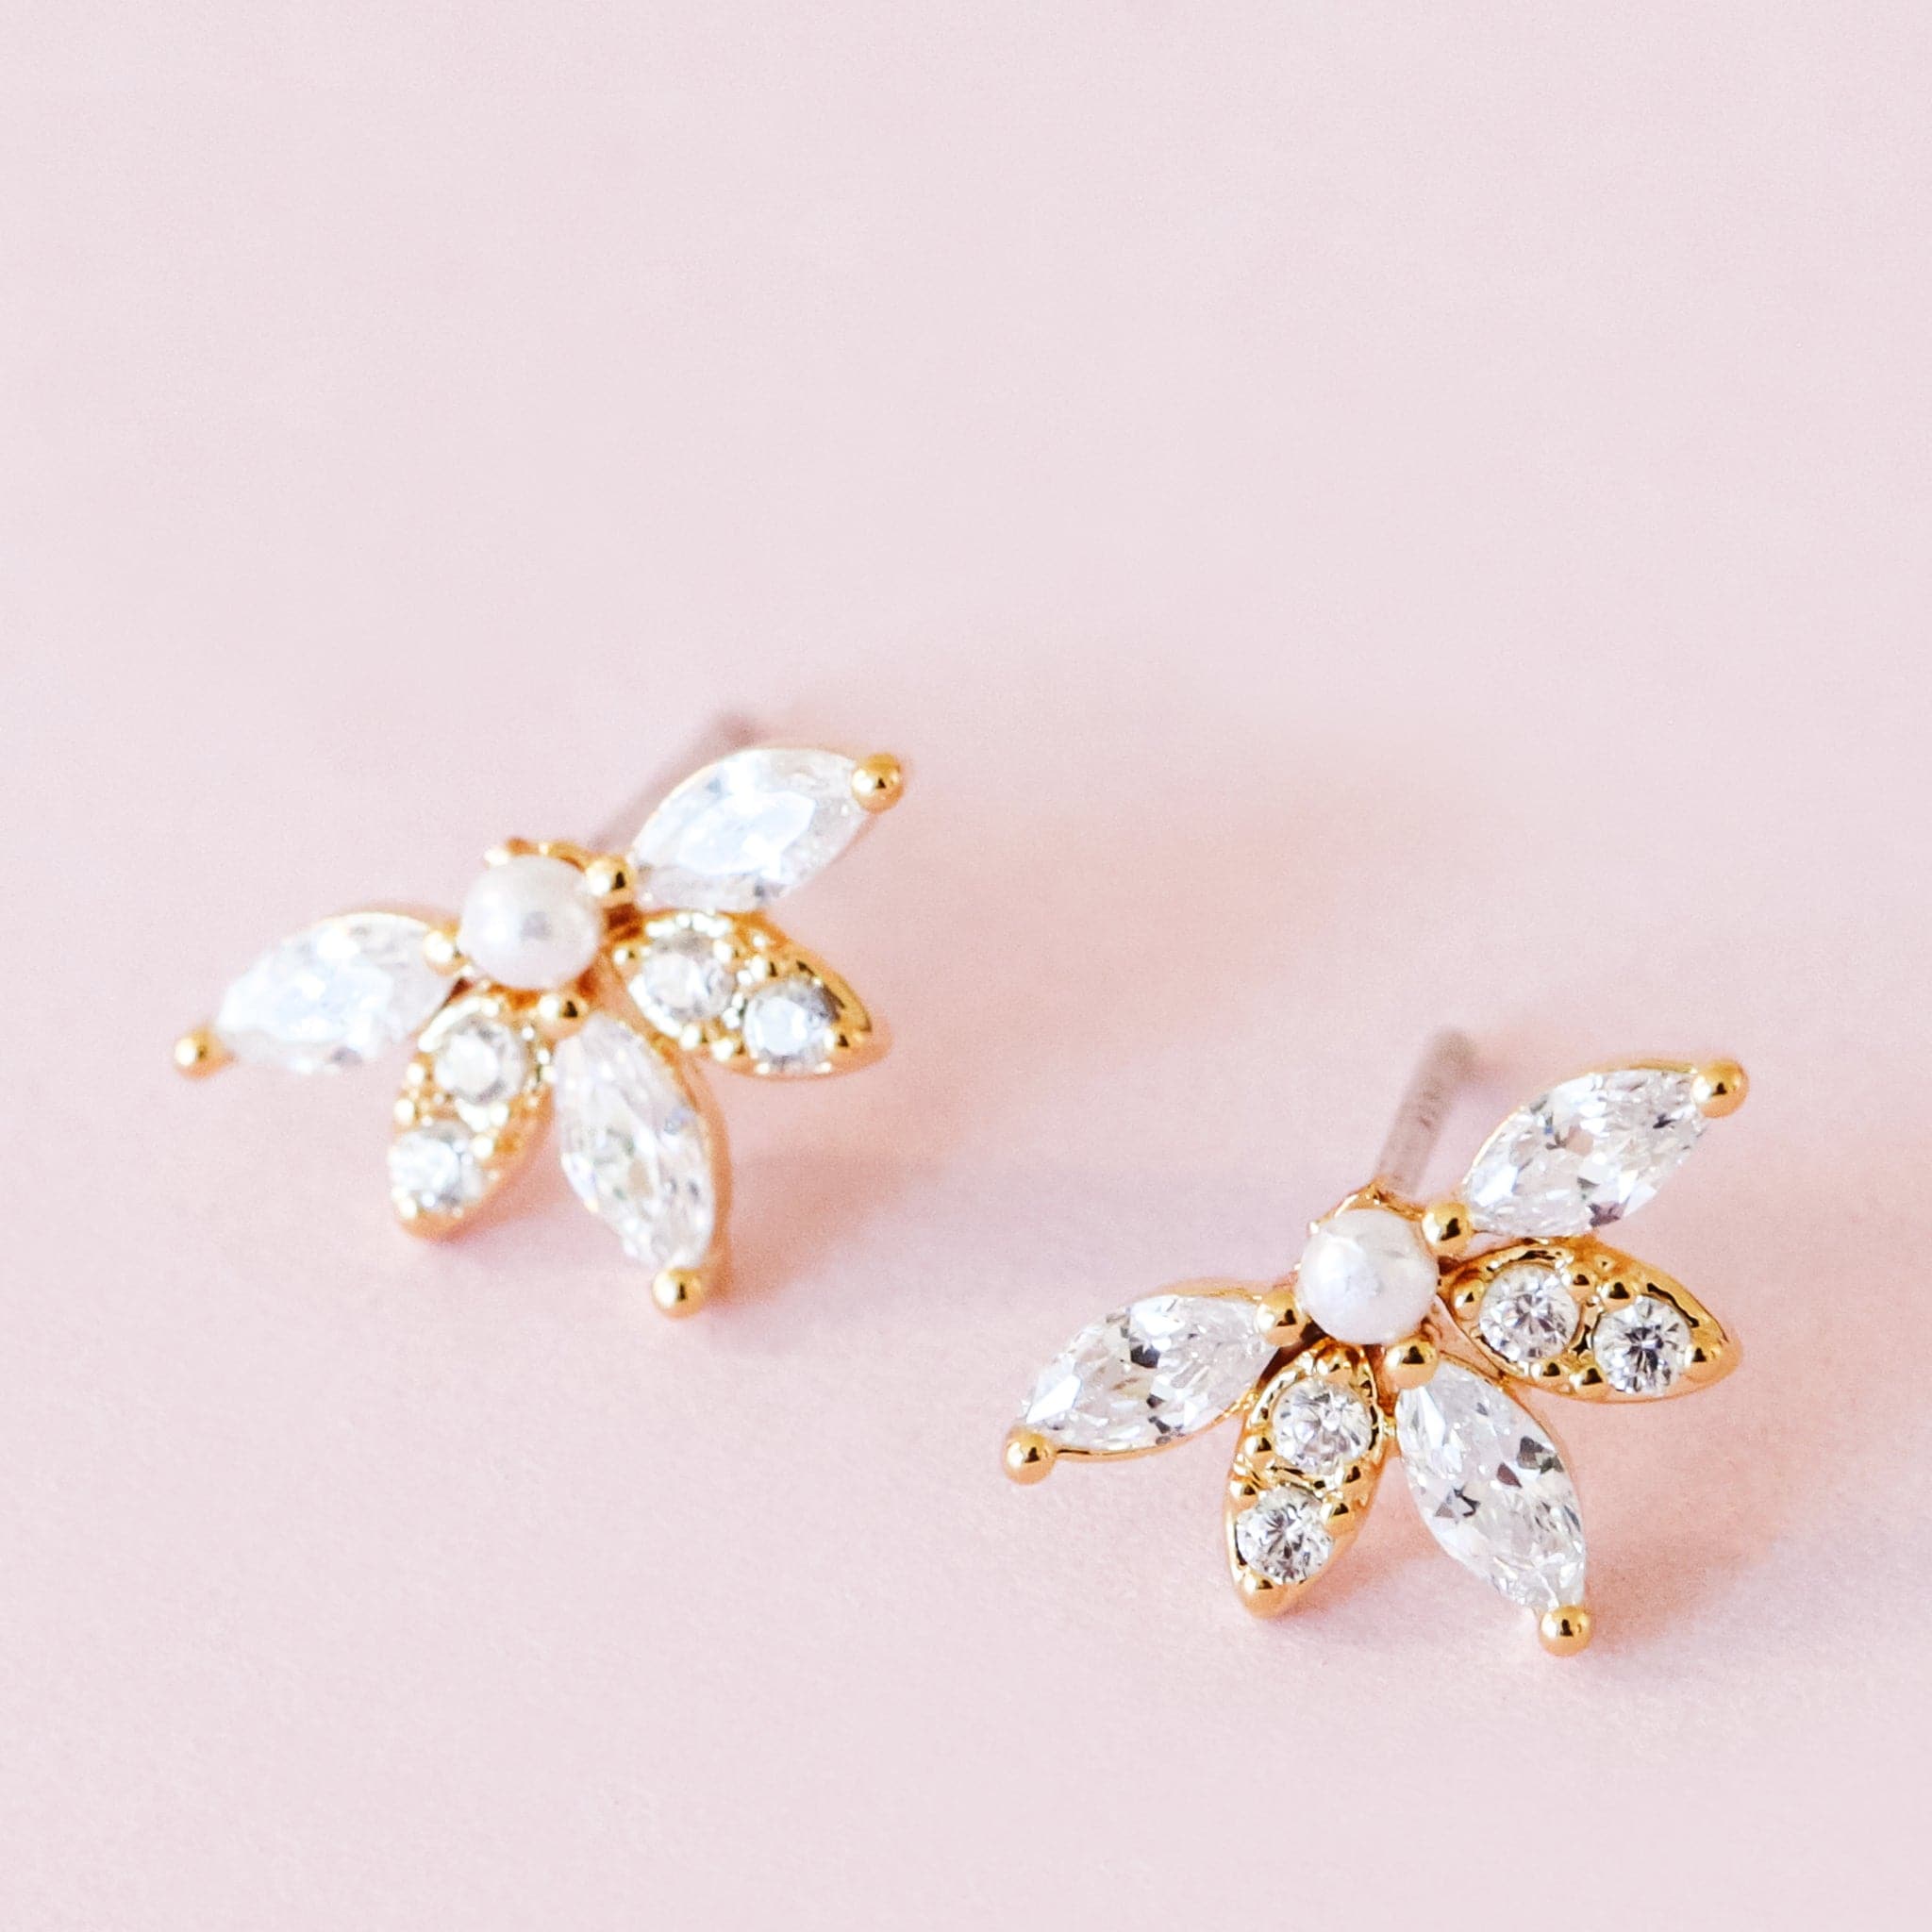 Gold metal stud earrings set with a pearl surrounded by a almond-shaped set crystal. Dried flowers are shown in the background.